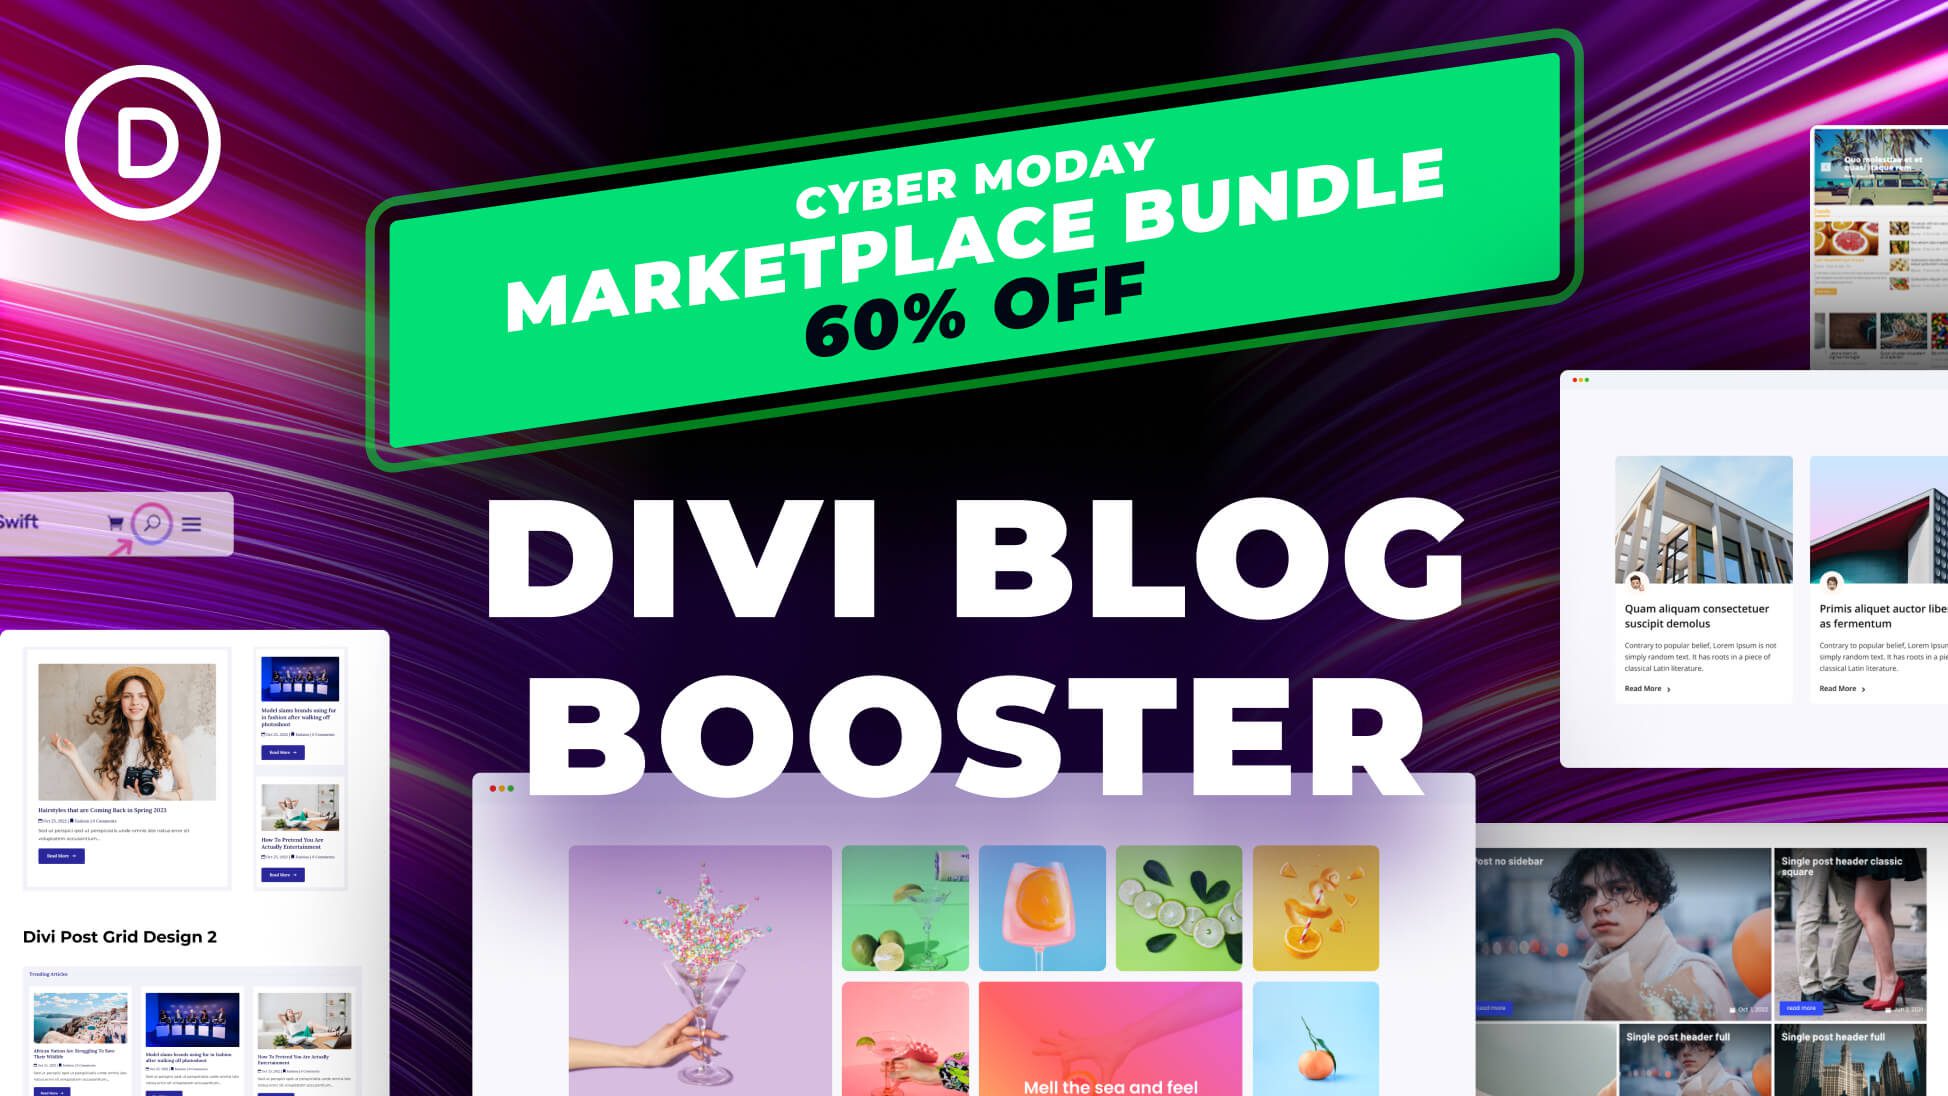 Introducing the NEW Divi Cyber Monday Blog Booster Bundle